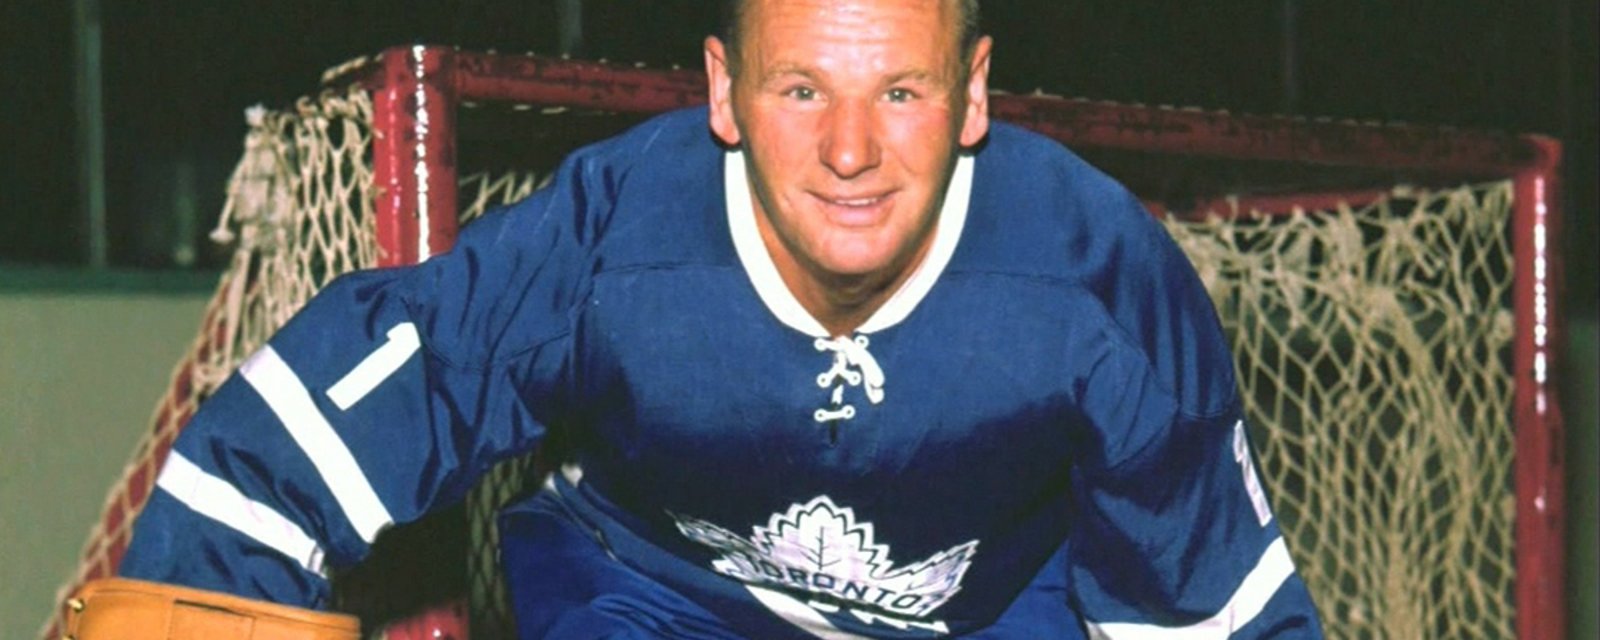 Details for Johnny Bower's memorial service 